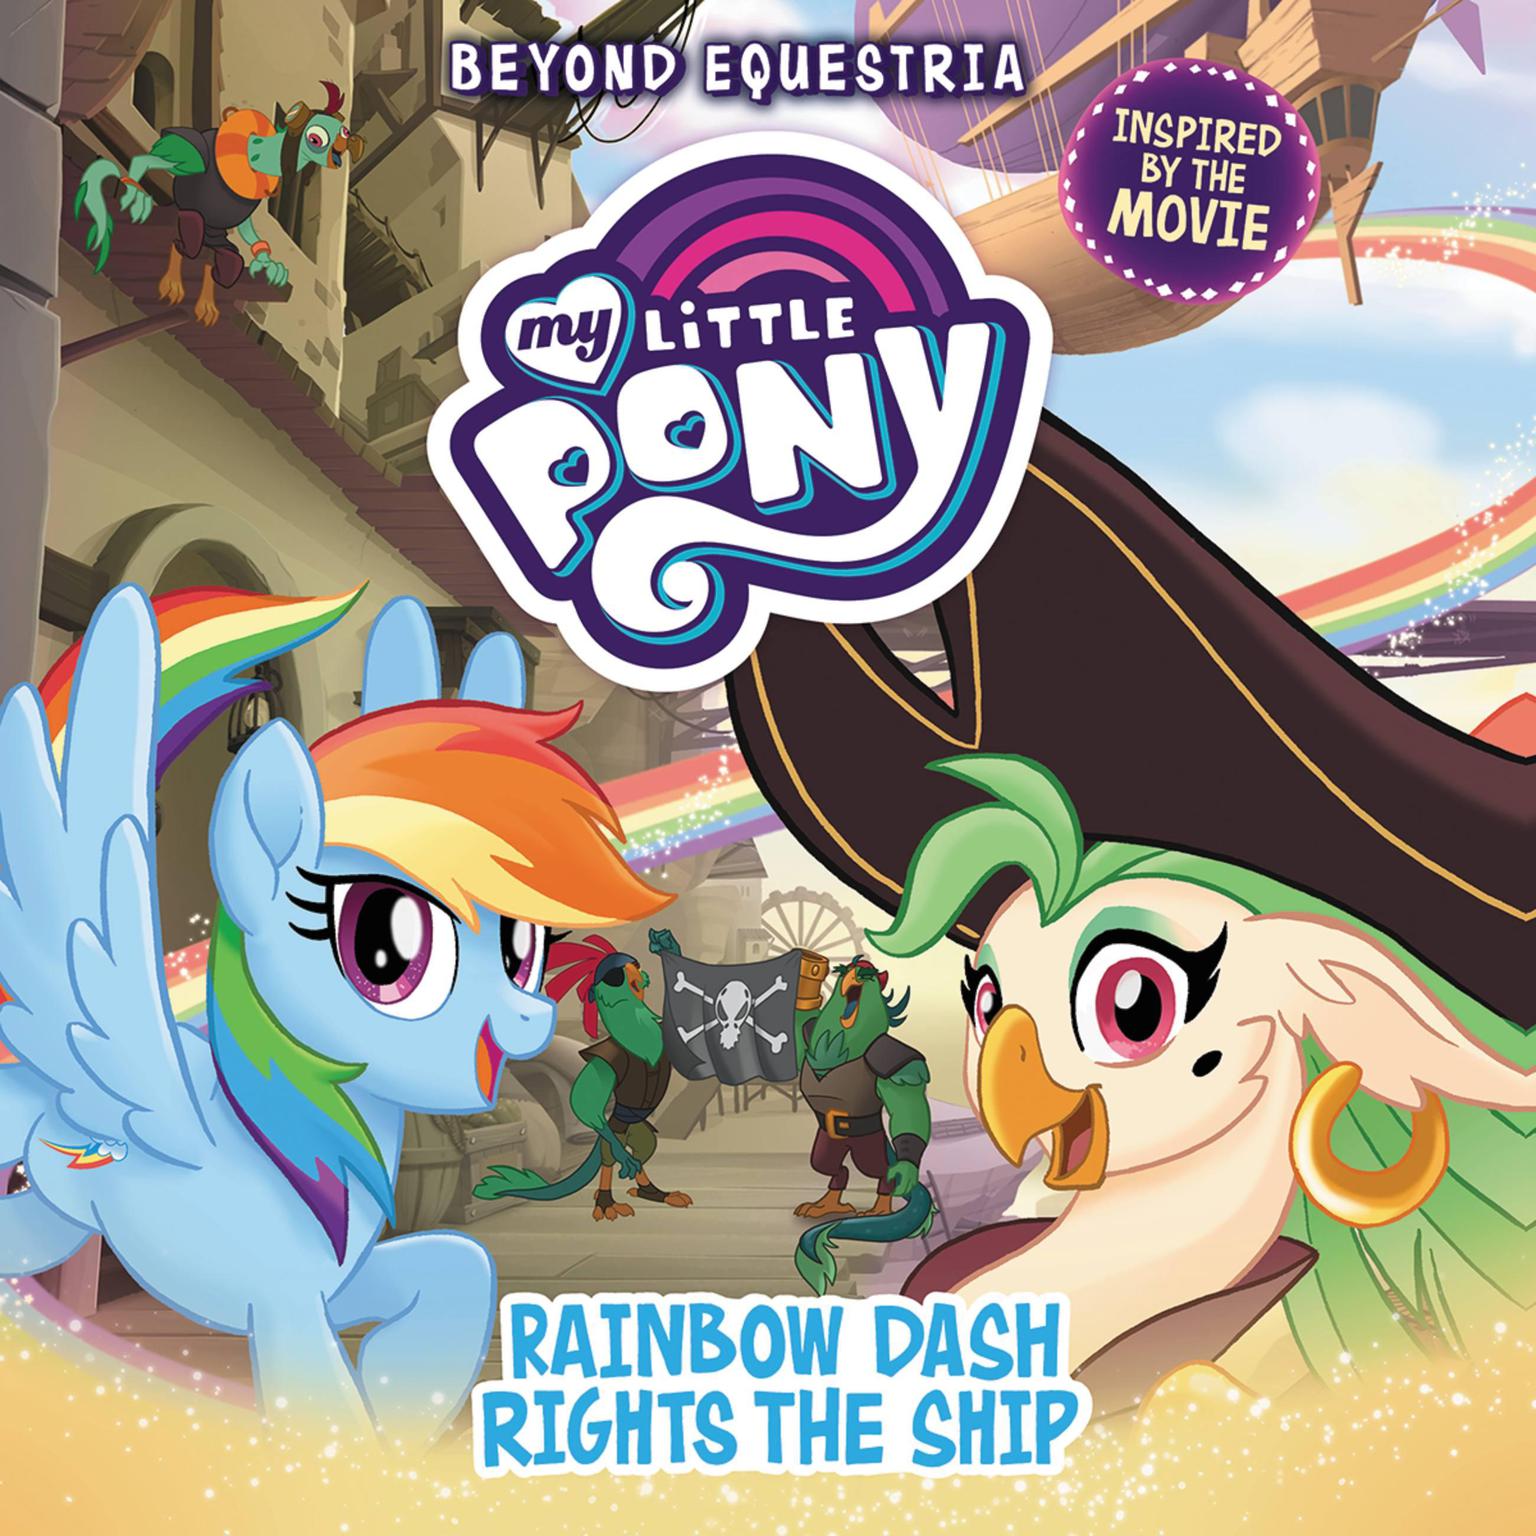 My Little Pony: Beyond Equestria: Rainbow Dash Rights the Ship Audiobook, by G. M. Berrow